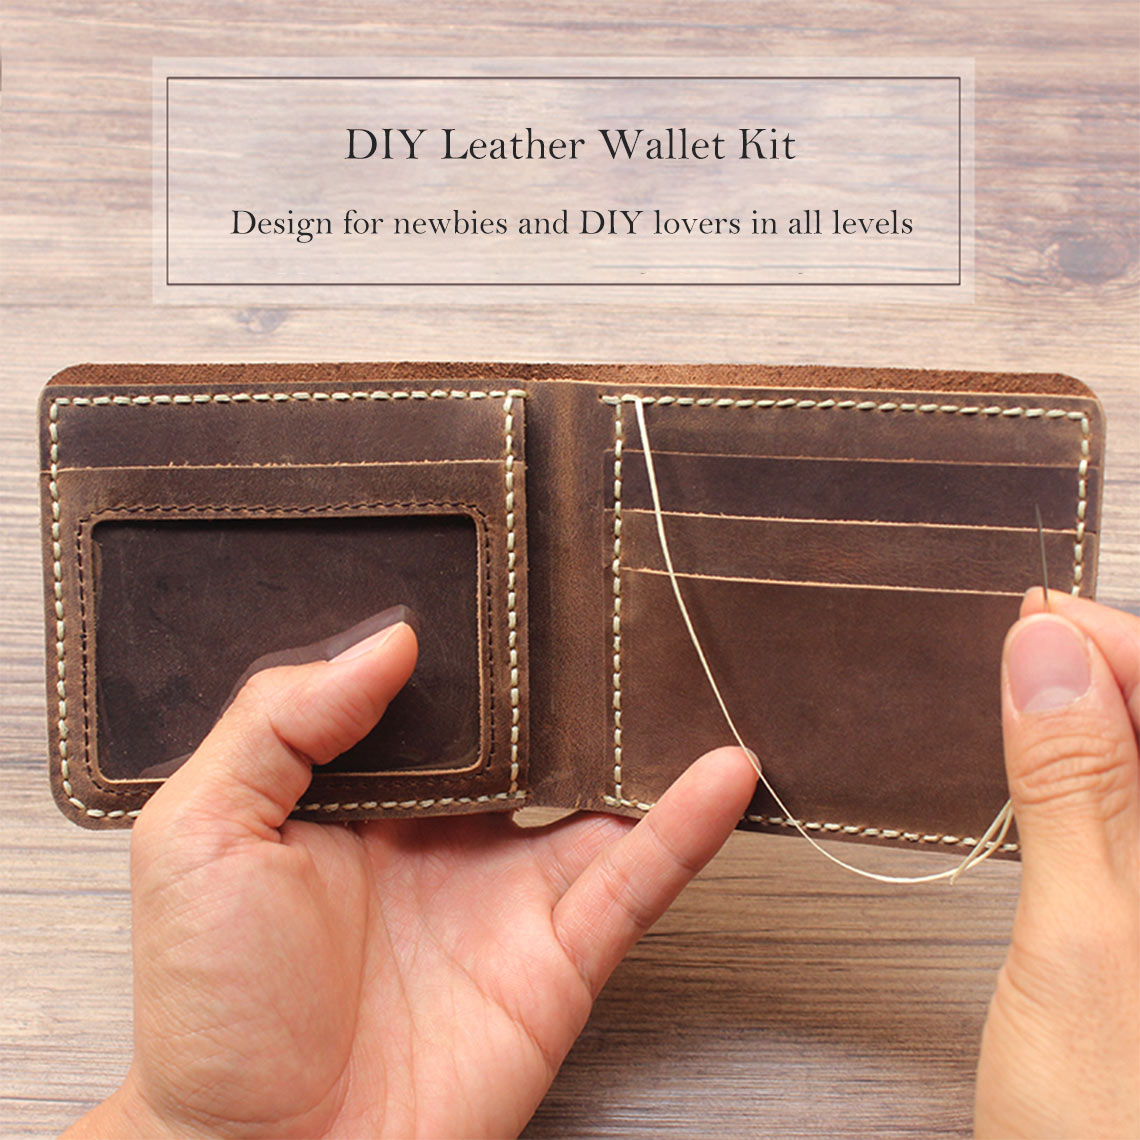 DIY Leather Wallet Kit | Easy DIY Leather/Sewing Projects for Beginners | POPSEWING™